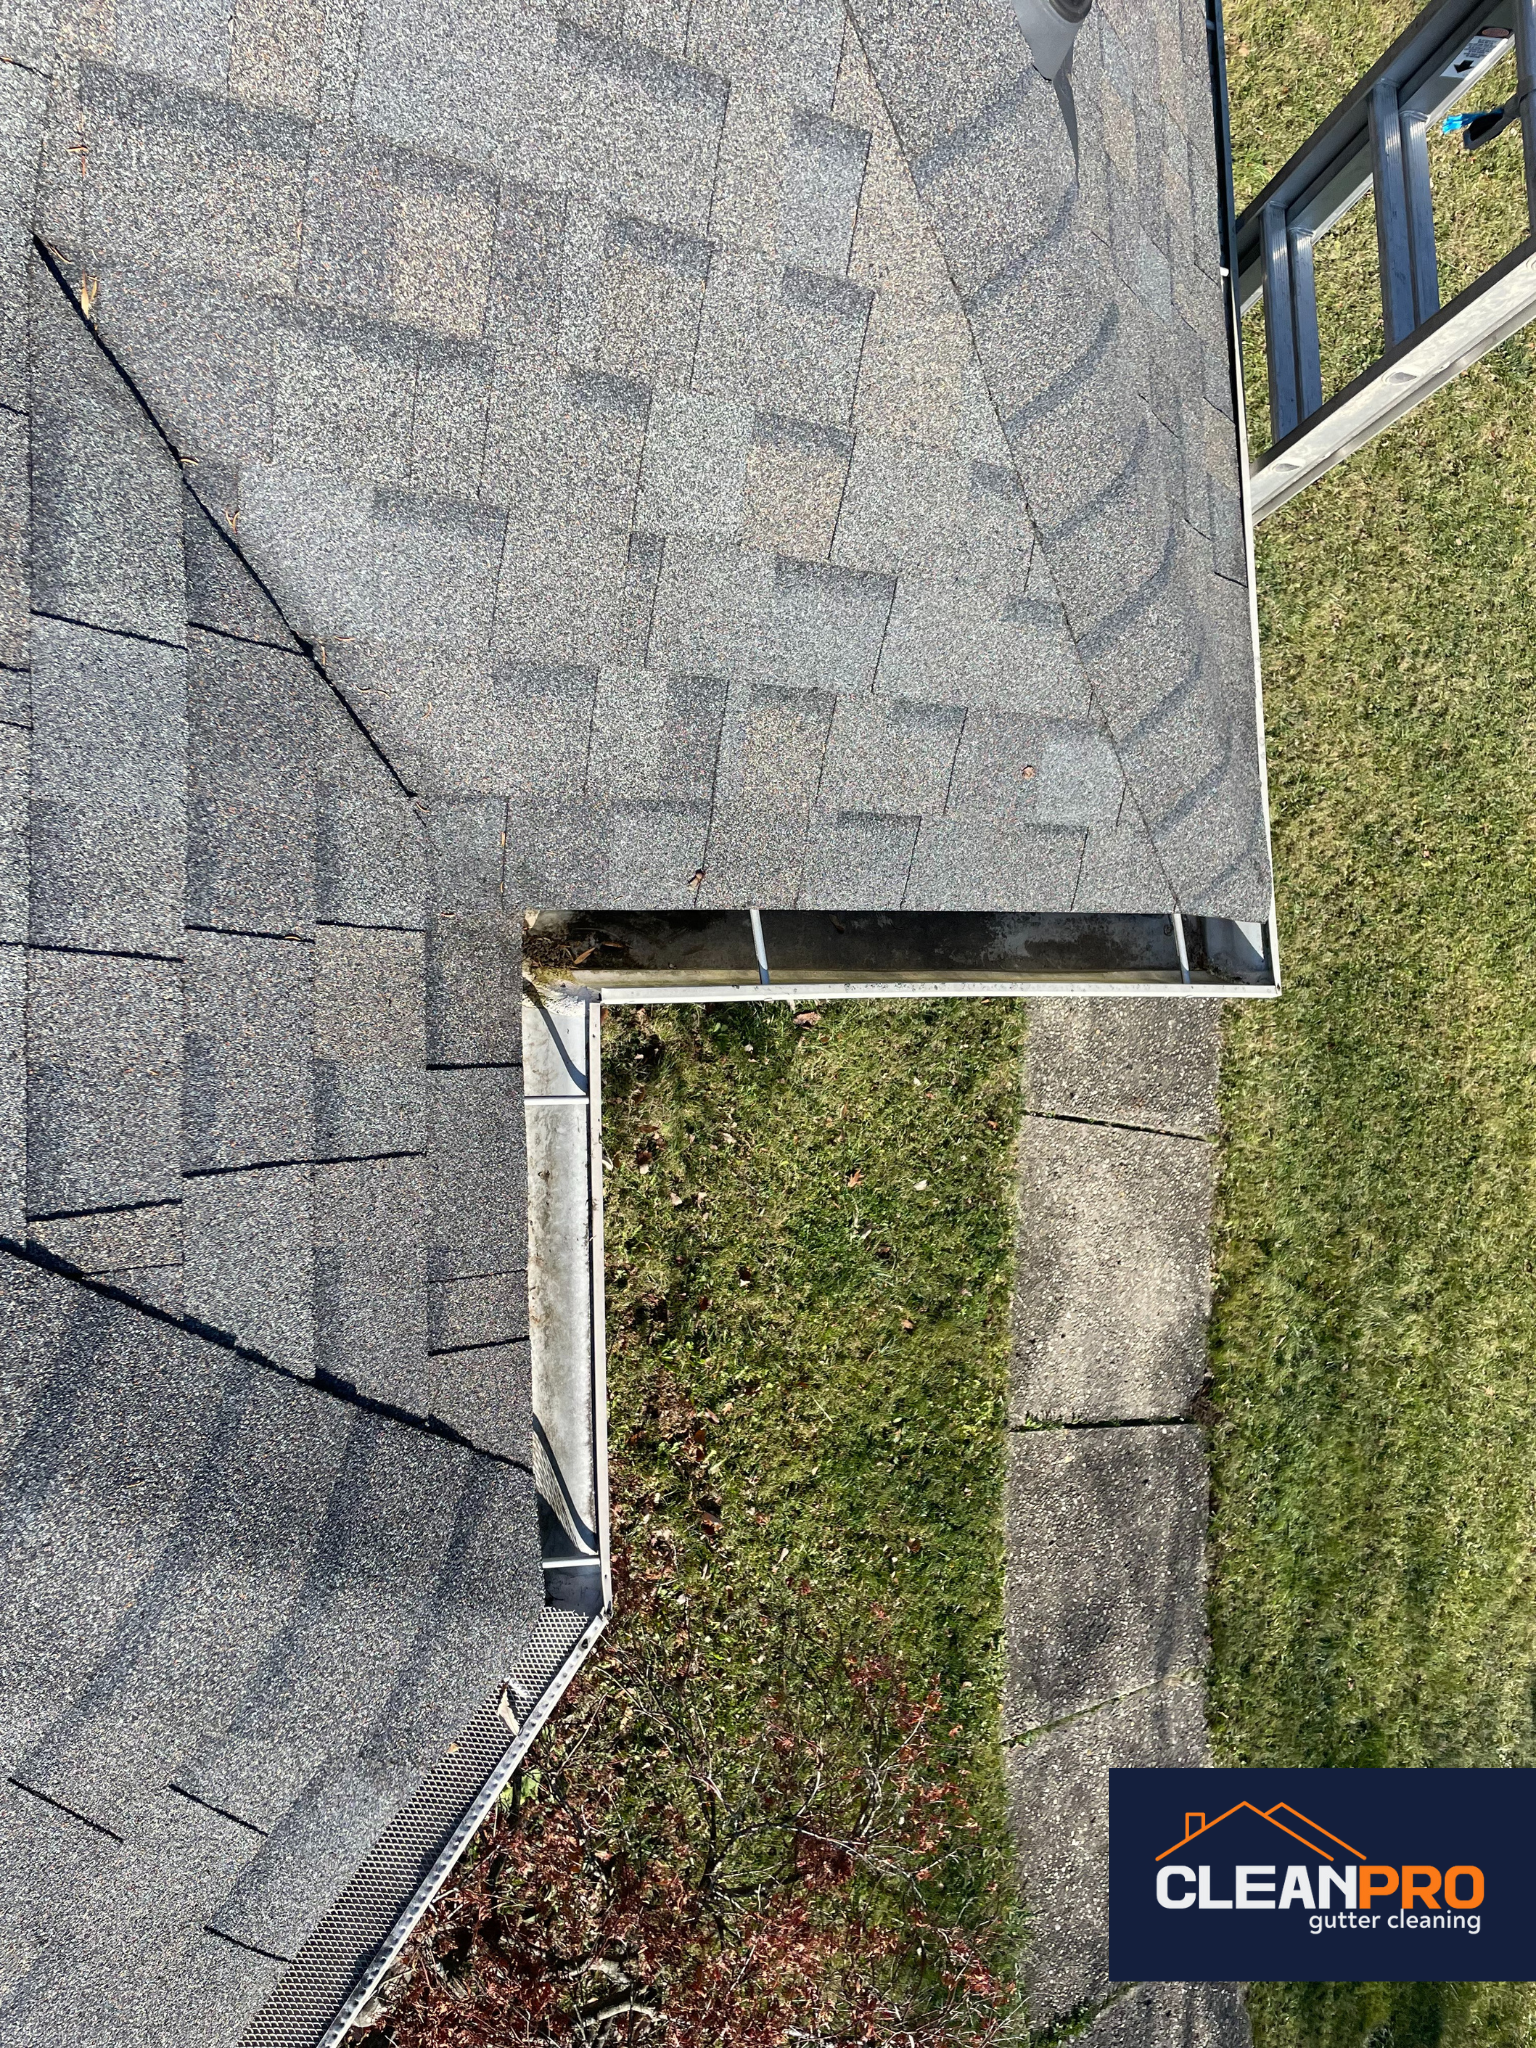 Local Gutter Cleaning in St Paul, MN